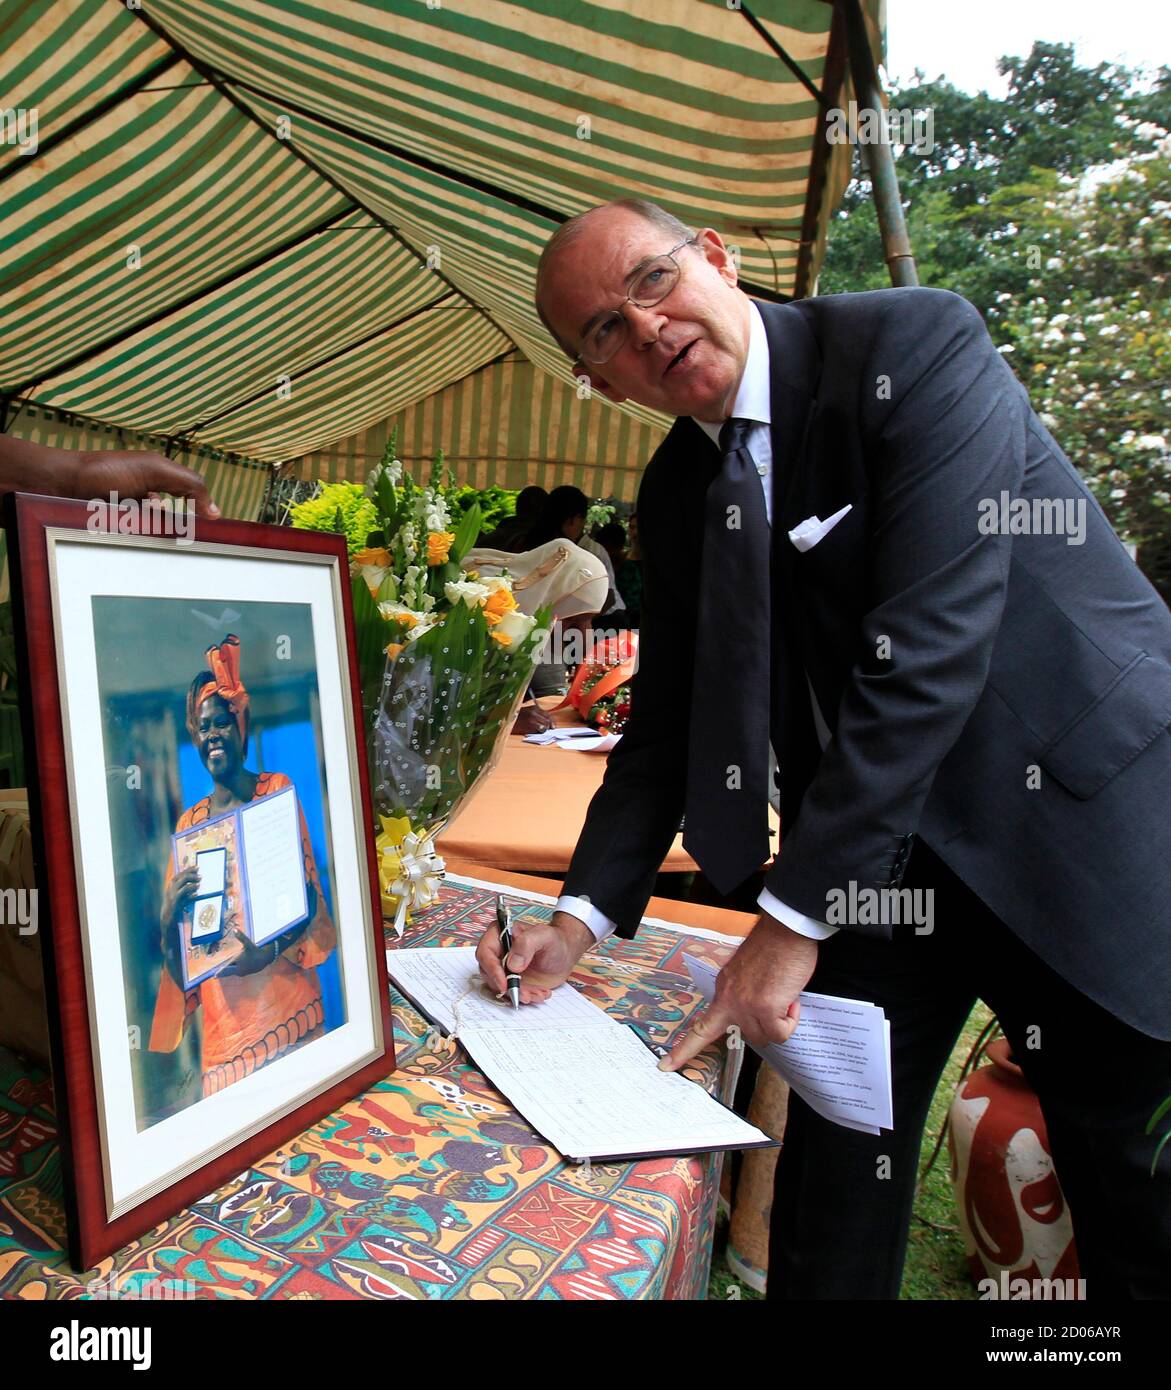 Norwegian ambassador to Kenya, Per Ludvig Magnus, signs a condolence book for the late Wangari Maathai, at the Green Belt Movement office in Kenya's capital of Nairobi, September 27, 2011, after presenting a condolence message from the Norwegian Nobel Committee. Maathai, the first African woman to win the Nobel Peace Prize for her campaigns to save Kenyan forests, died in hospital on Sunday after a long struggle with ovarian cancer. REUTERS/Thomas Mukoya (KENYA - Tags: POLITICS SOCIETY OBITUARY) Stock Photo